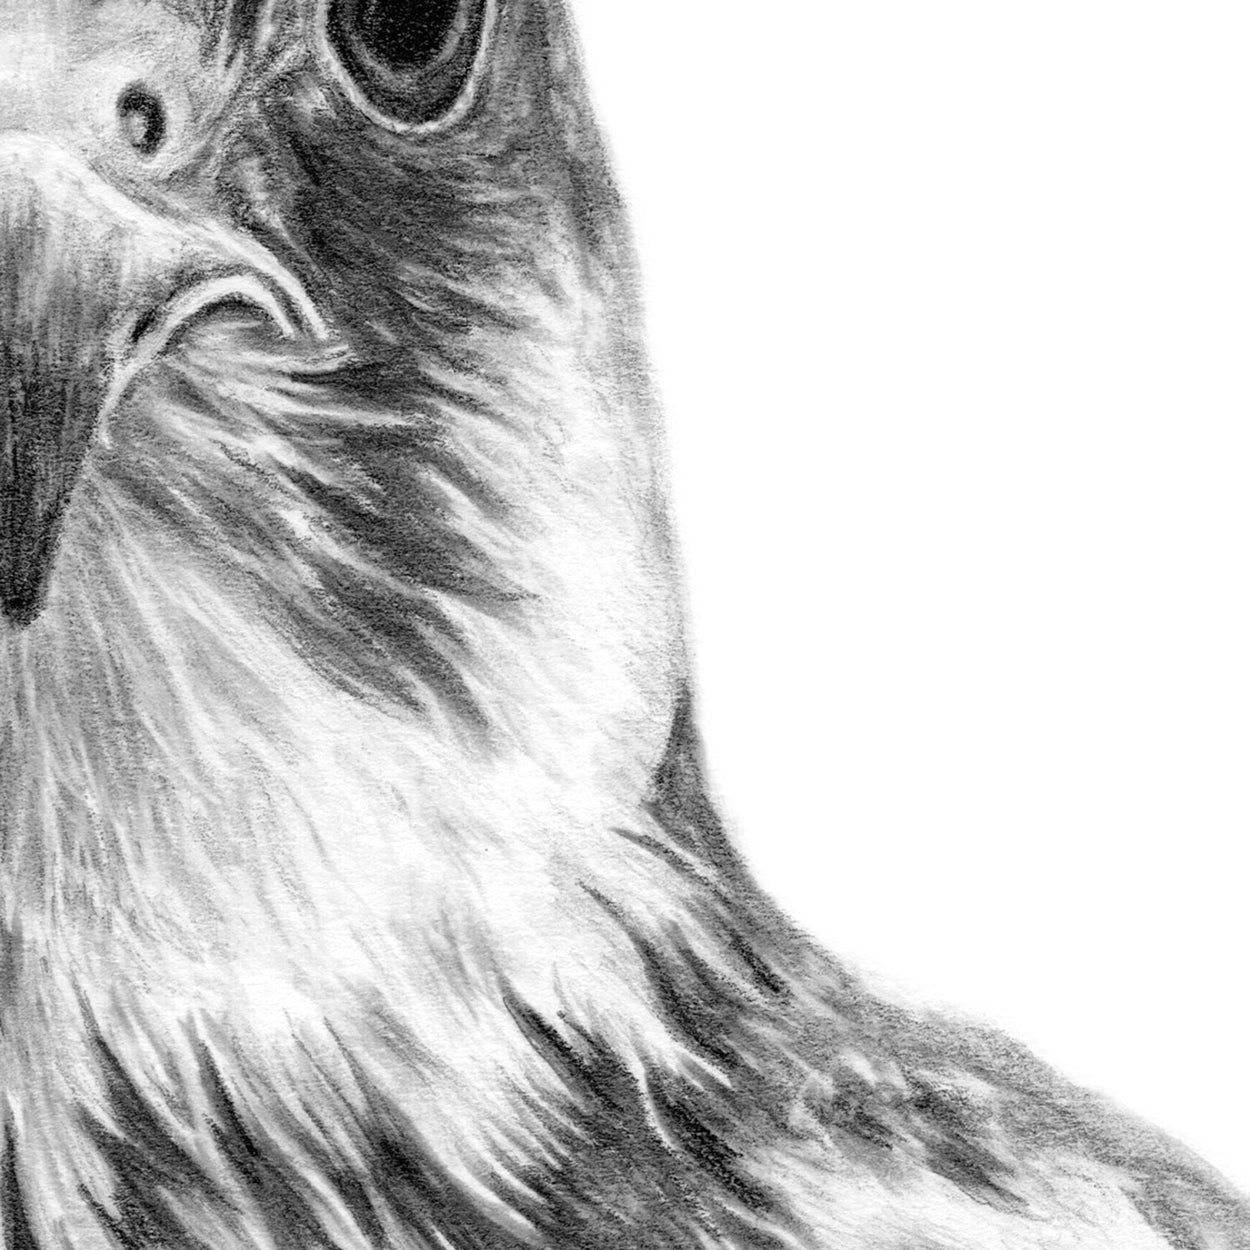 Bird of Prey Pencil Drawing Close-up - The Thriving Wild